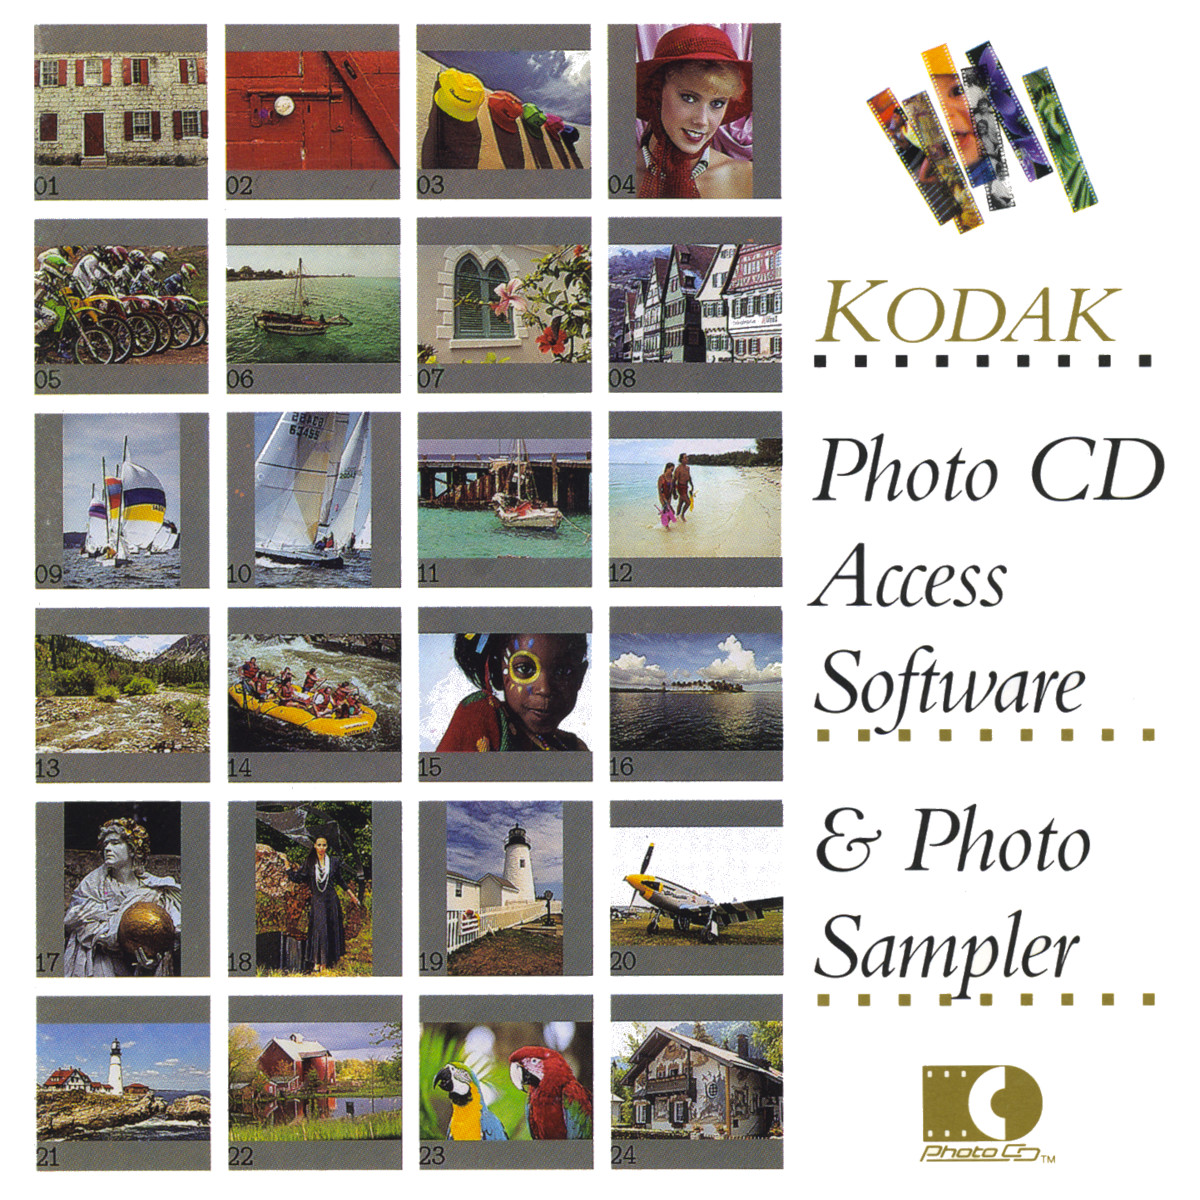 Front of the CD jewel case inlay would normally be an index of the first 36 images on the disc